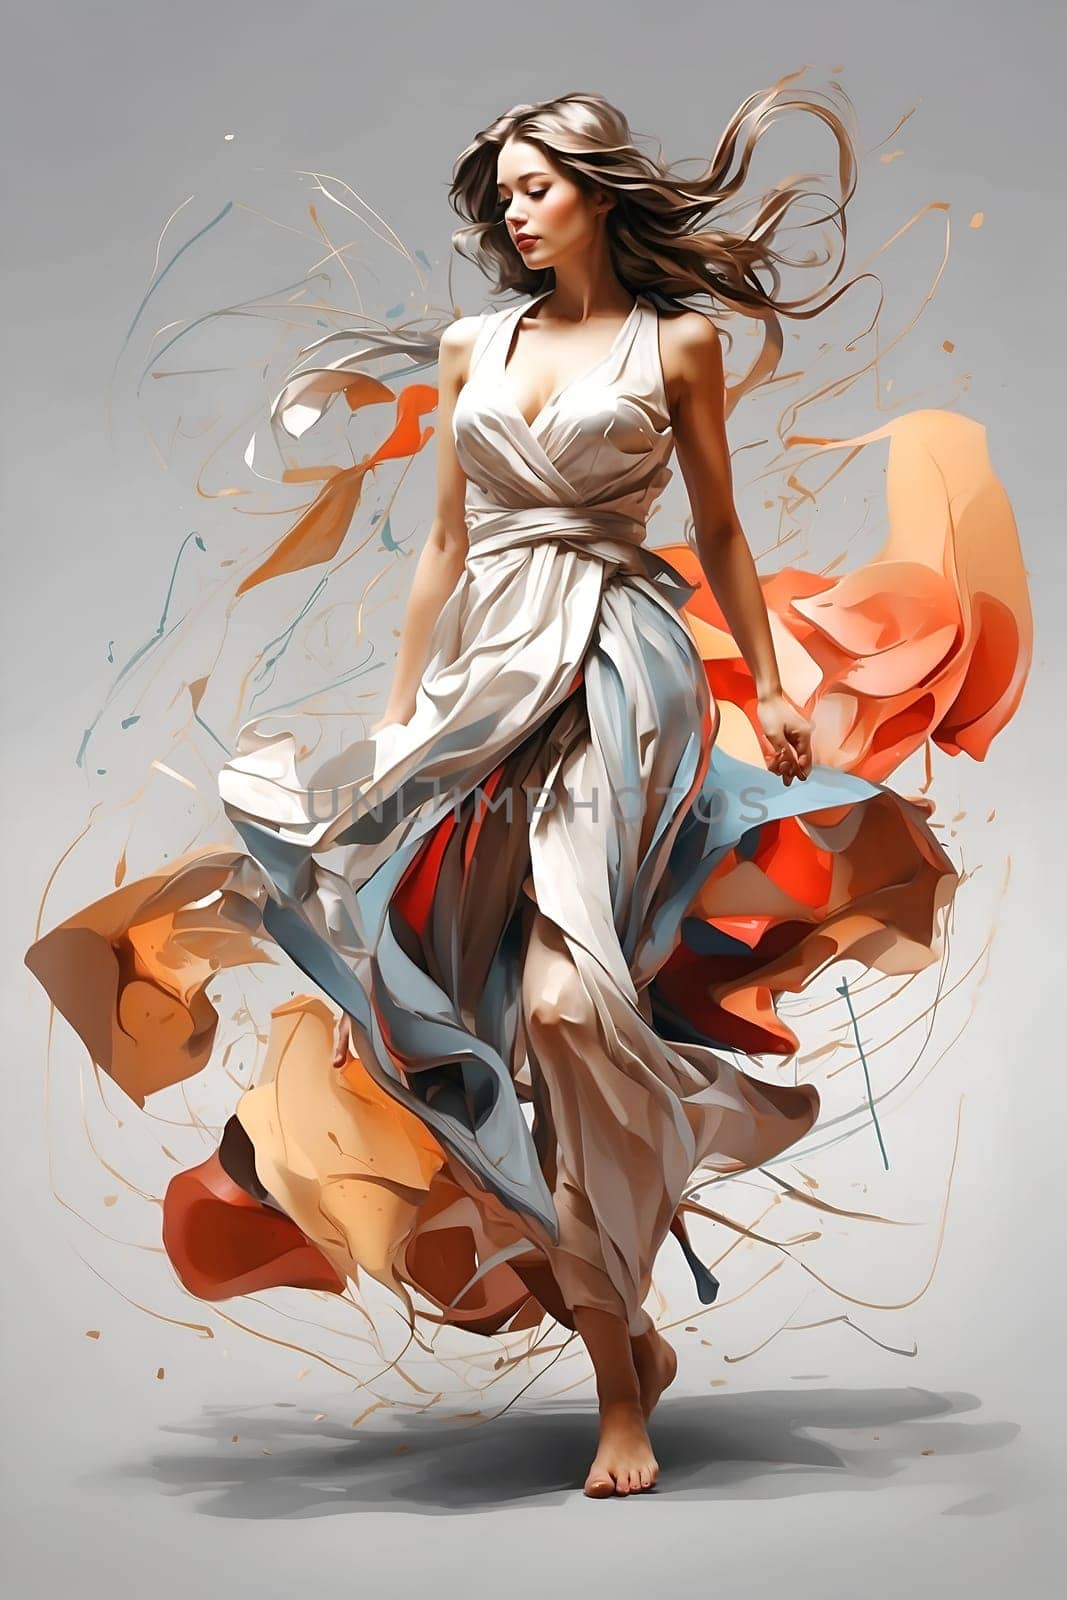 A woman wearing a white dress energetically dances, moving fluidly to the rhythm of the music.